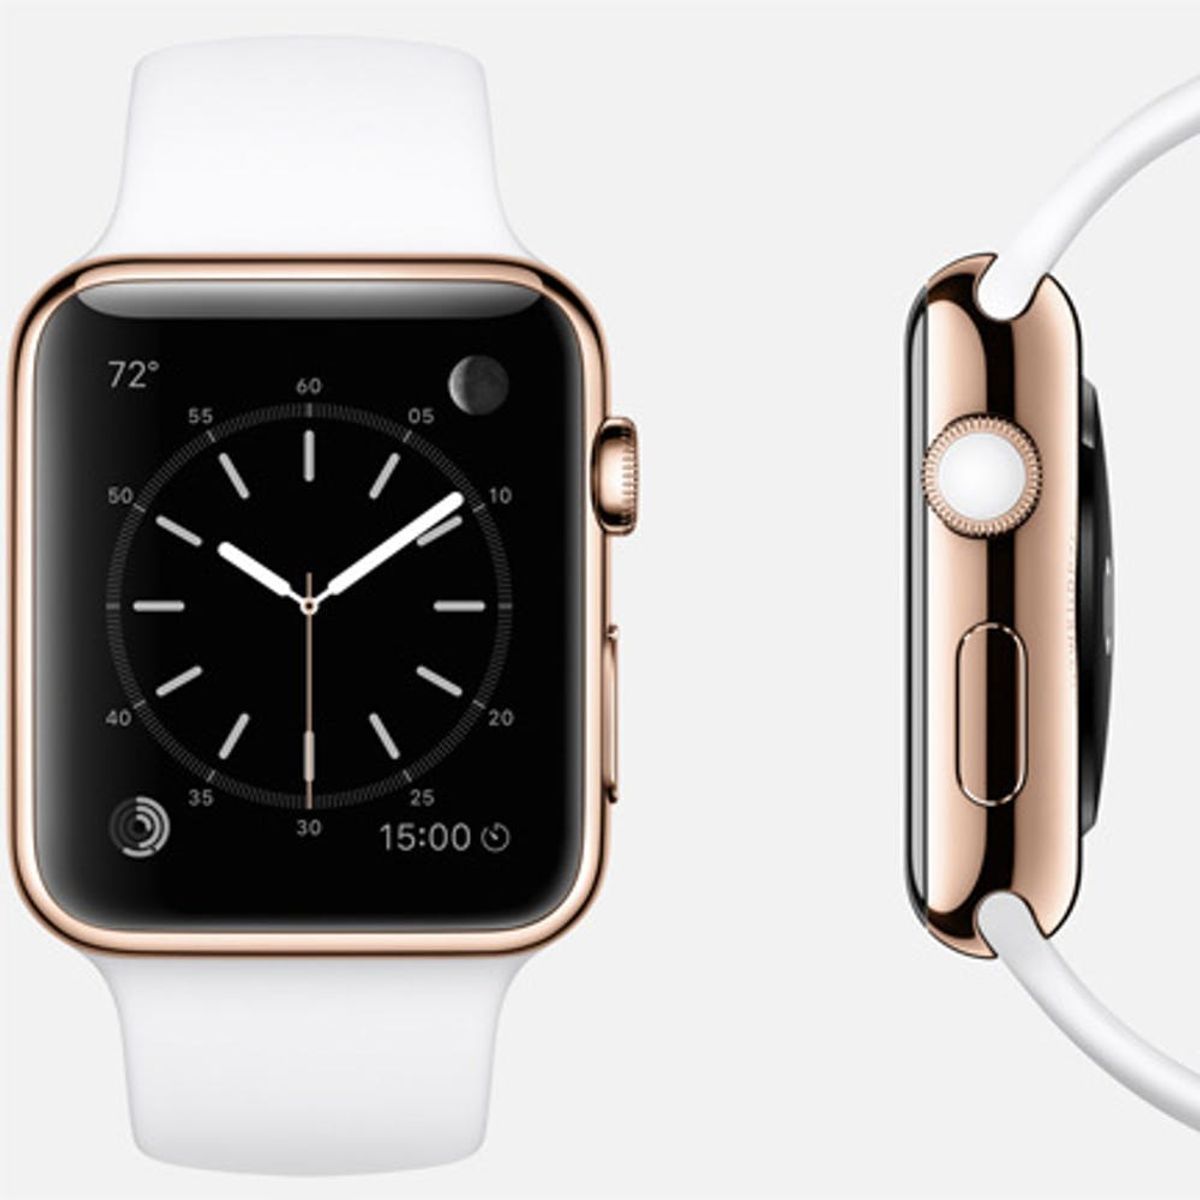 OMG: Here’s How to Get an Apple Watch for $20